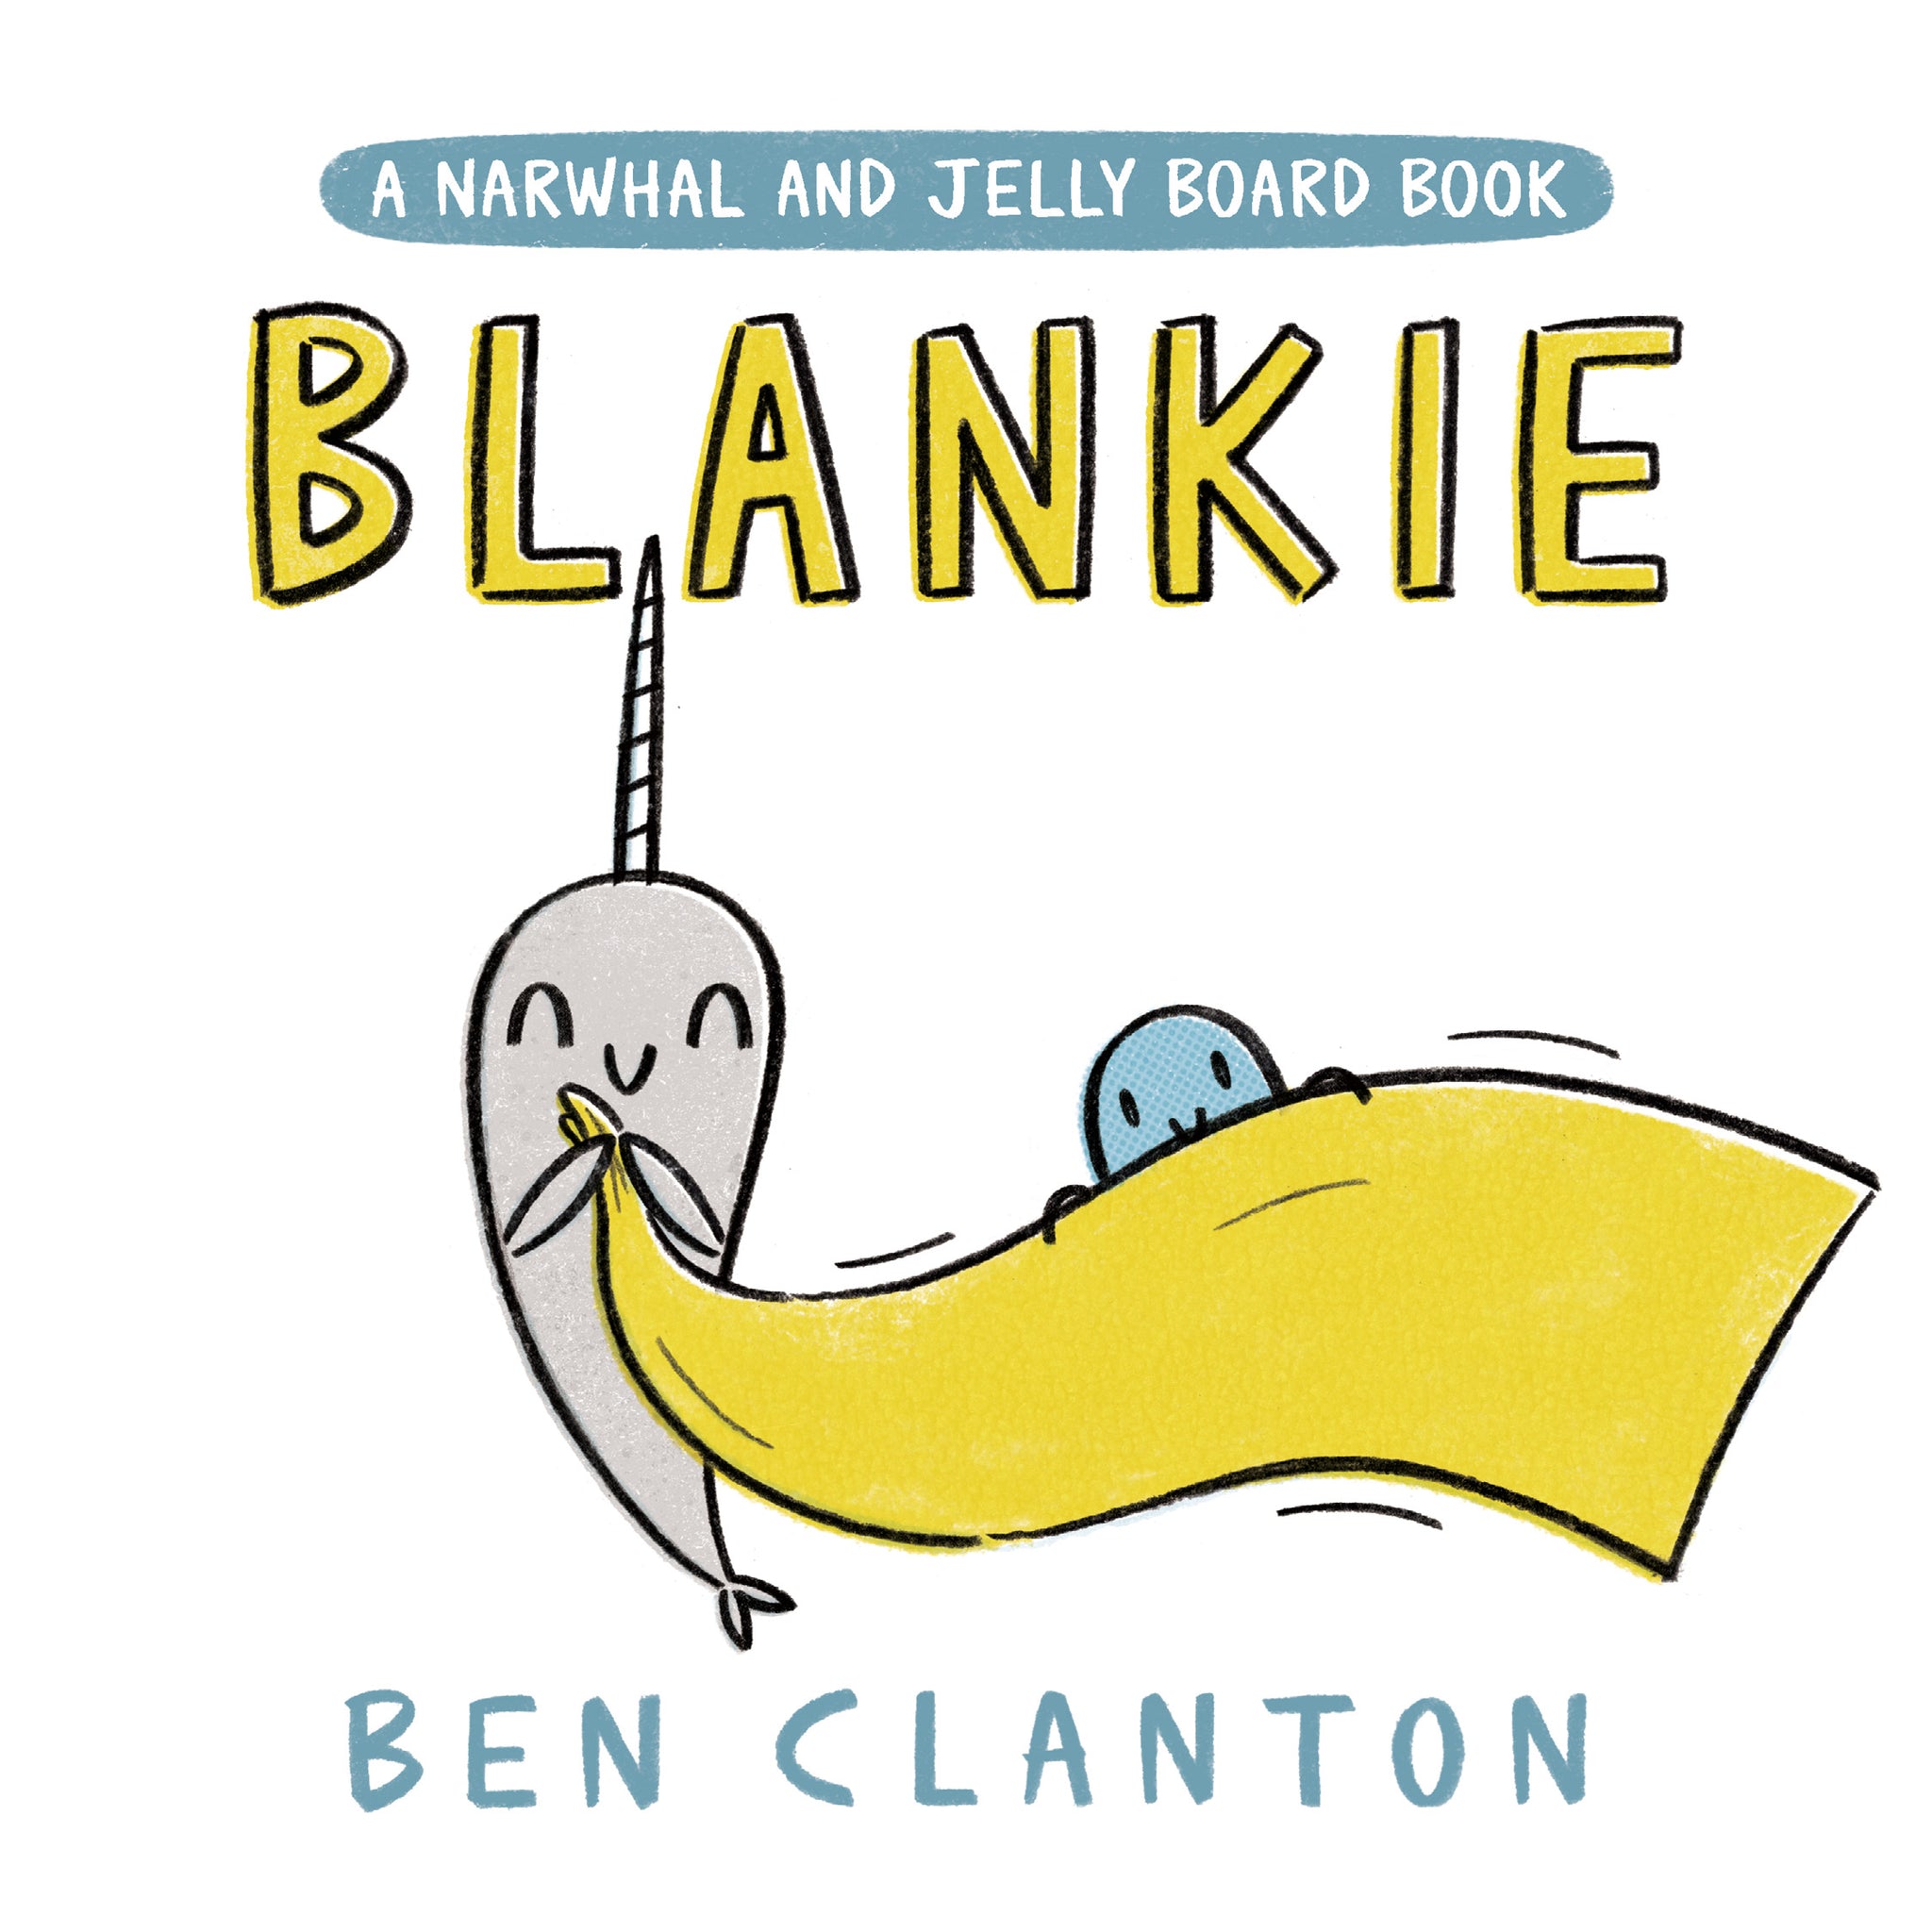 blankie (a narwhal and jelly board book)